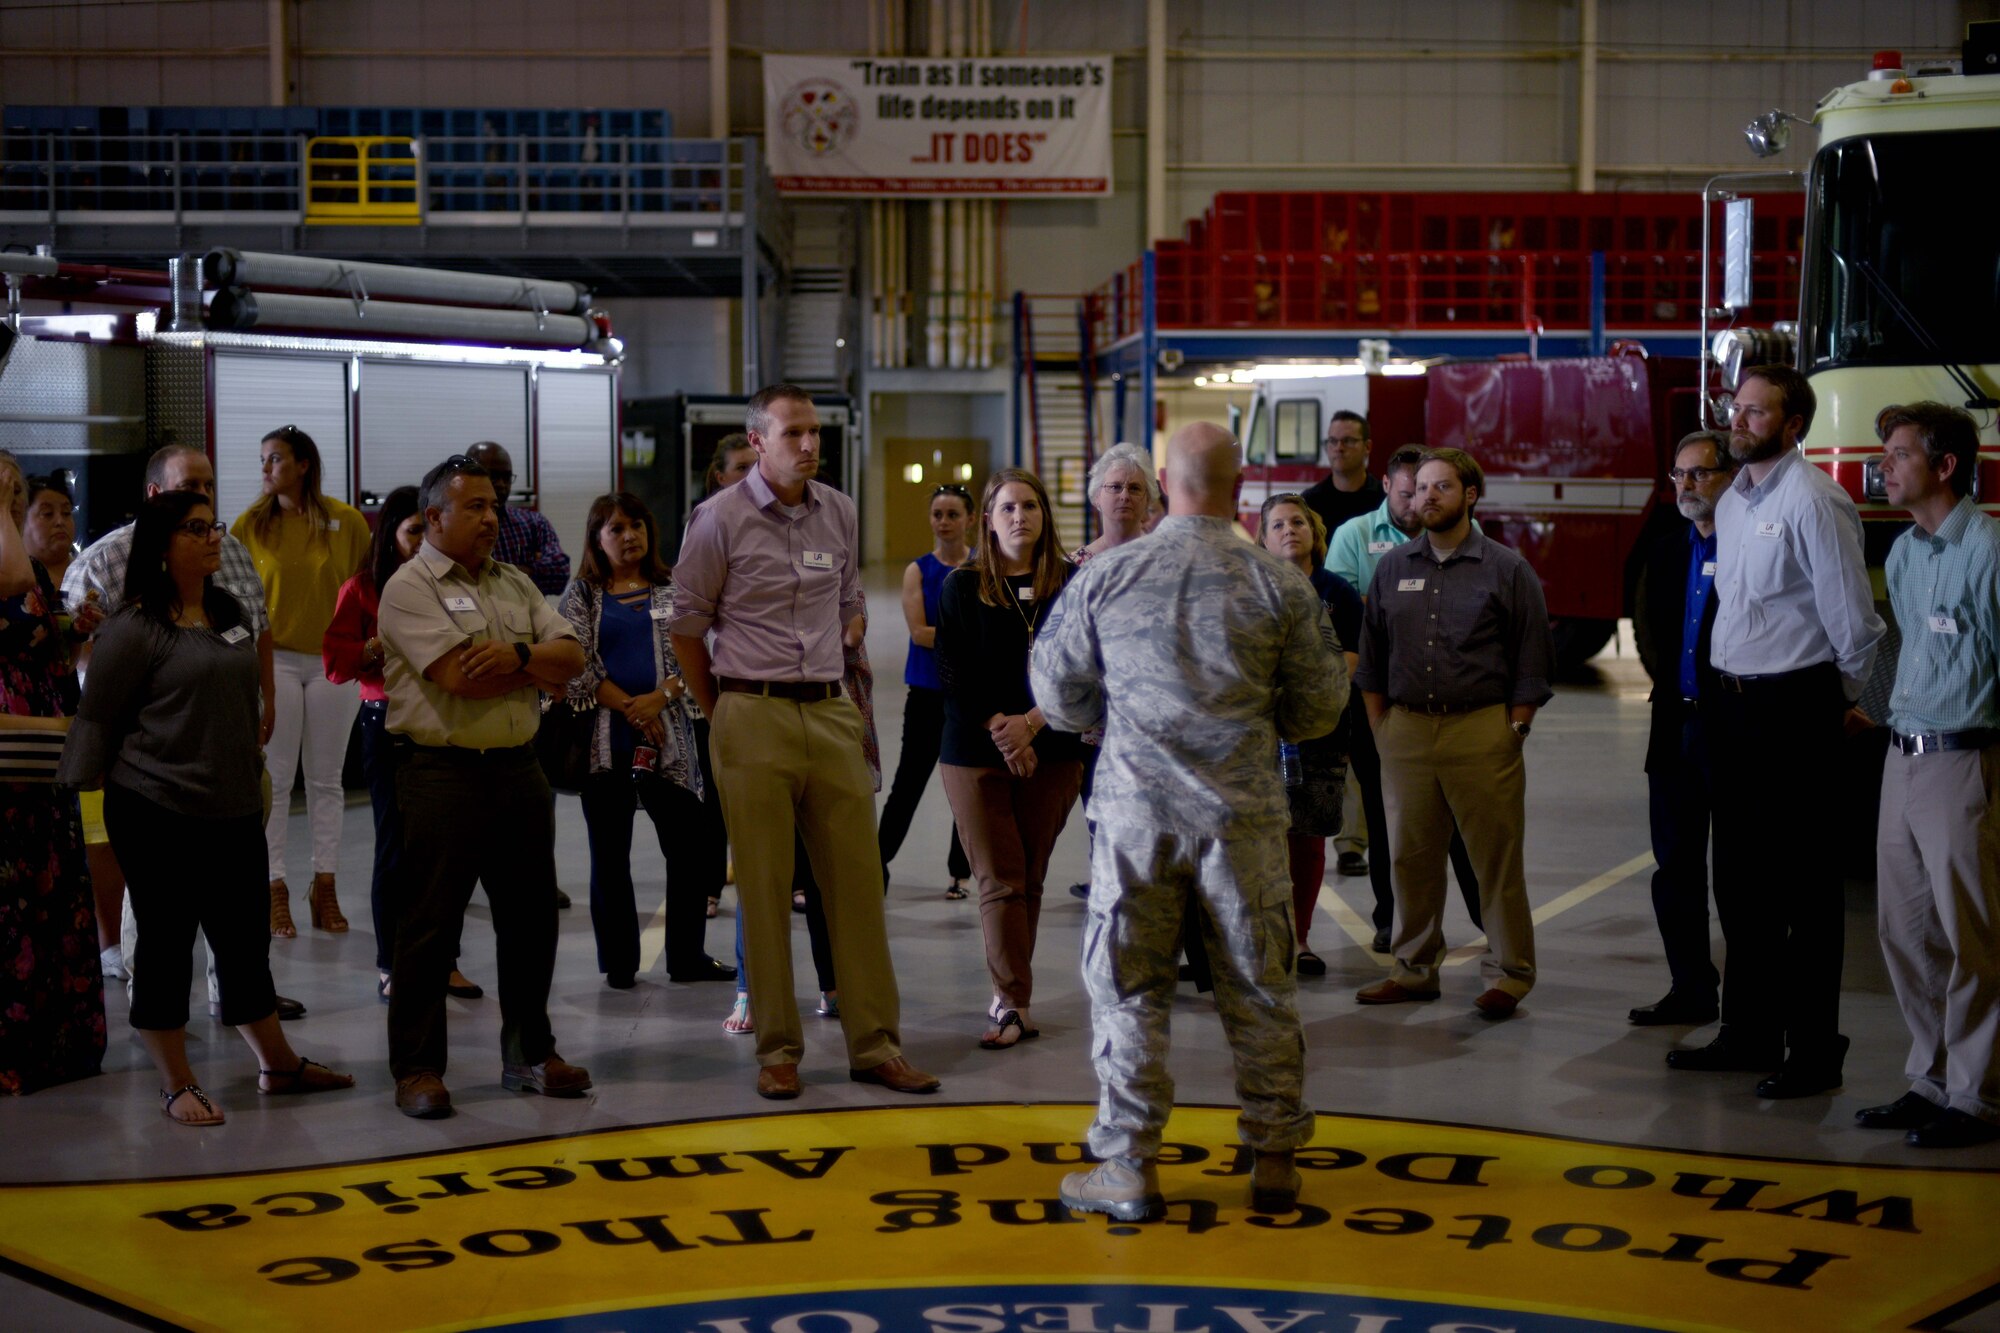 U.S. Air Force Master Sgt. Cory Bowers, 312th Training Squadron Advance Courses chief, briefs the Leadership San Angelo members on the Louis F. Garland Department of Defense Fire Academy in the High Bay on Goodfellow Air Force Base, Texas, April 12, 2018. The academy was one of multiple locations the LSA visited. (U.S. Air Force photo by Senior Airman Randall Moose/Released)